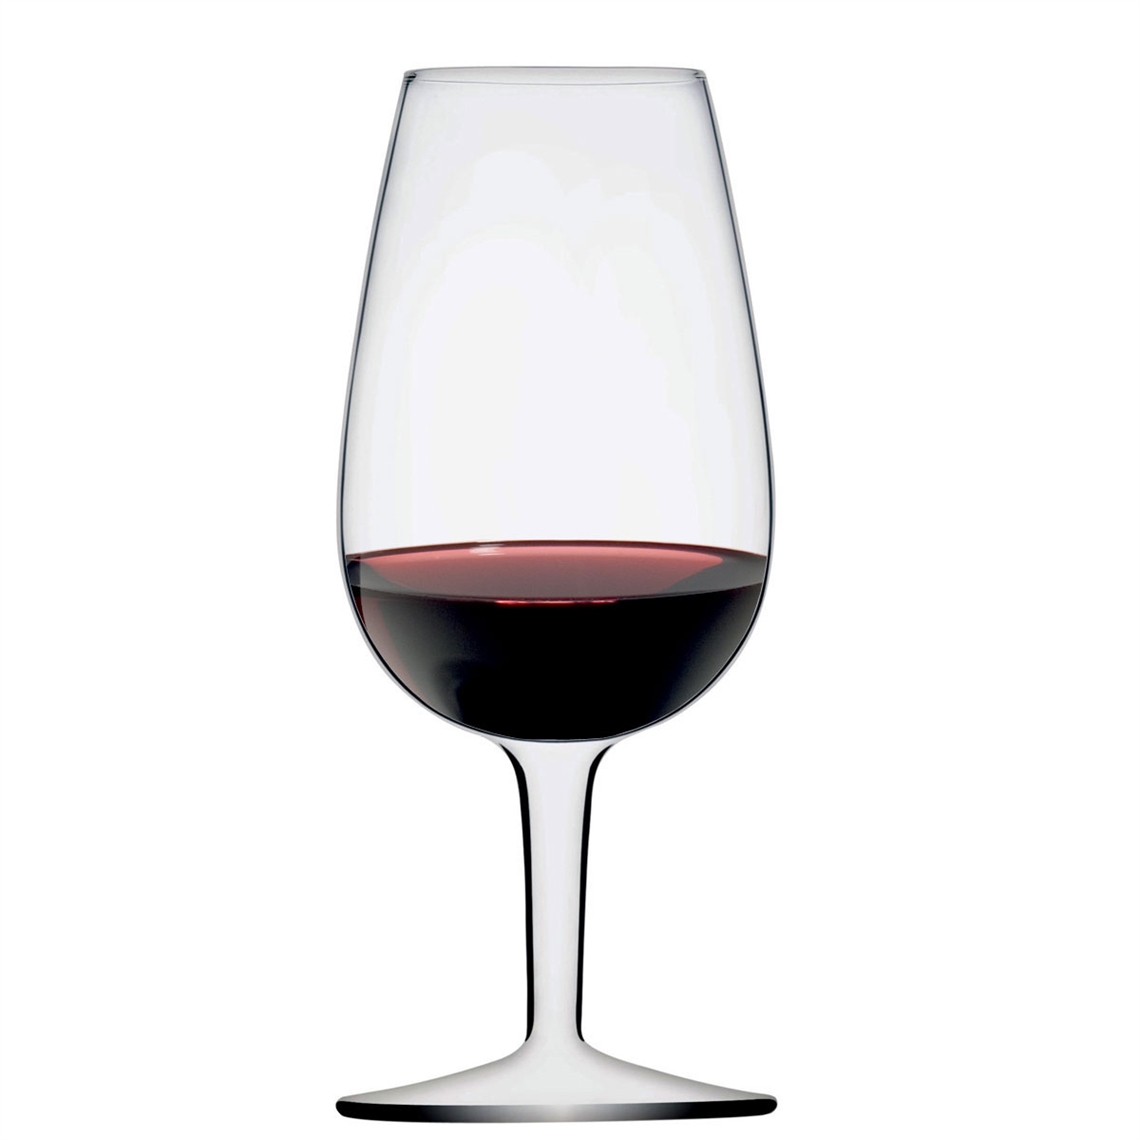 View more ivento from our Wine Tasting Glasses range